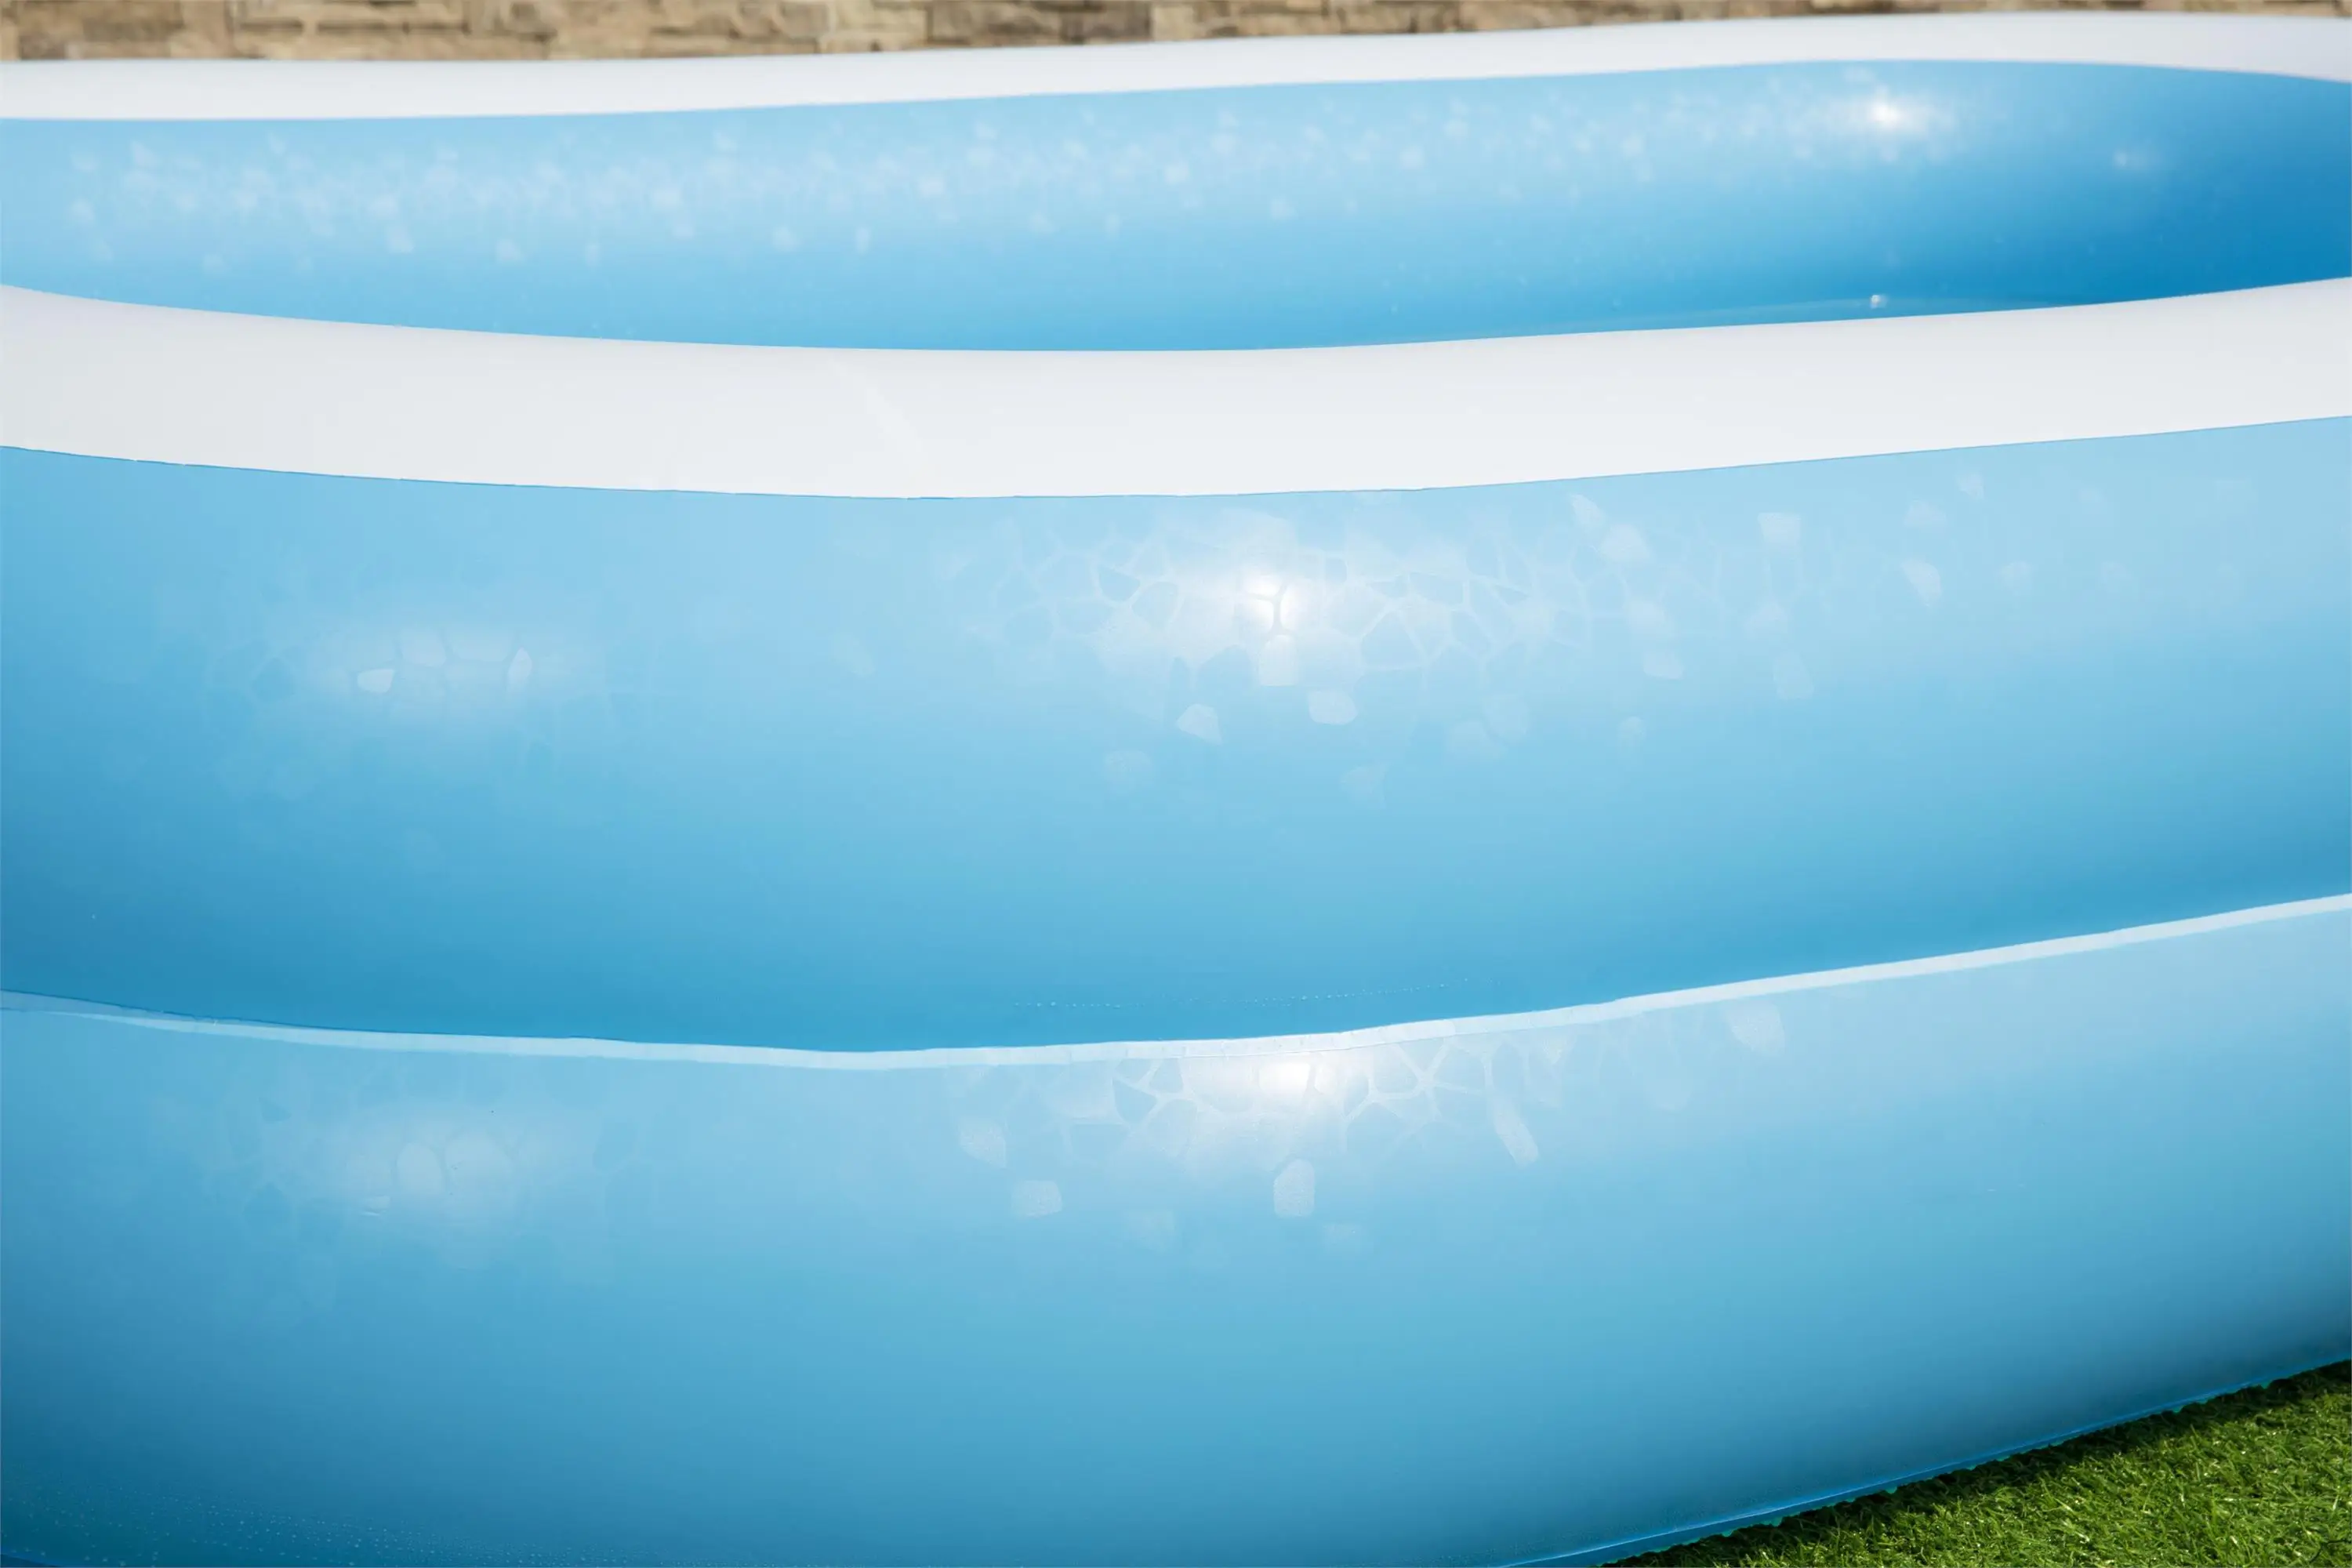 
Bestway 54006 Kids Inflatable family lounge pool inflatable Rectangular Family Swimming Pool 